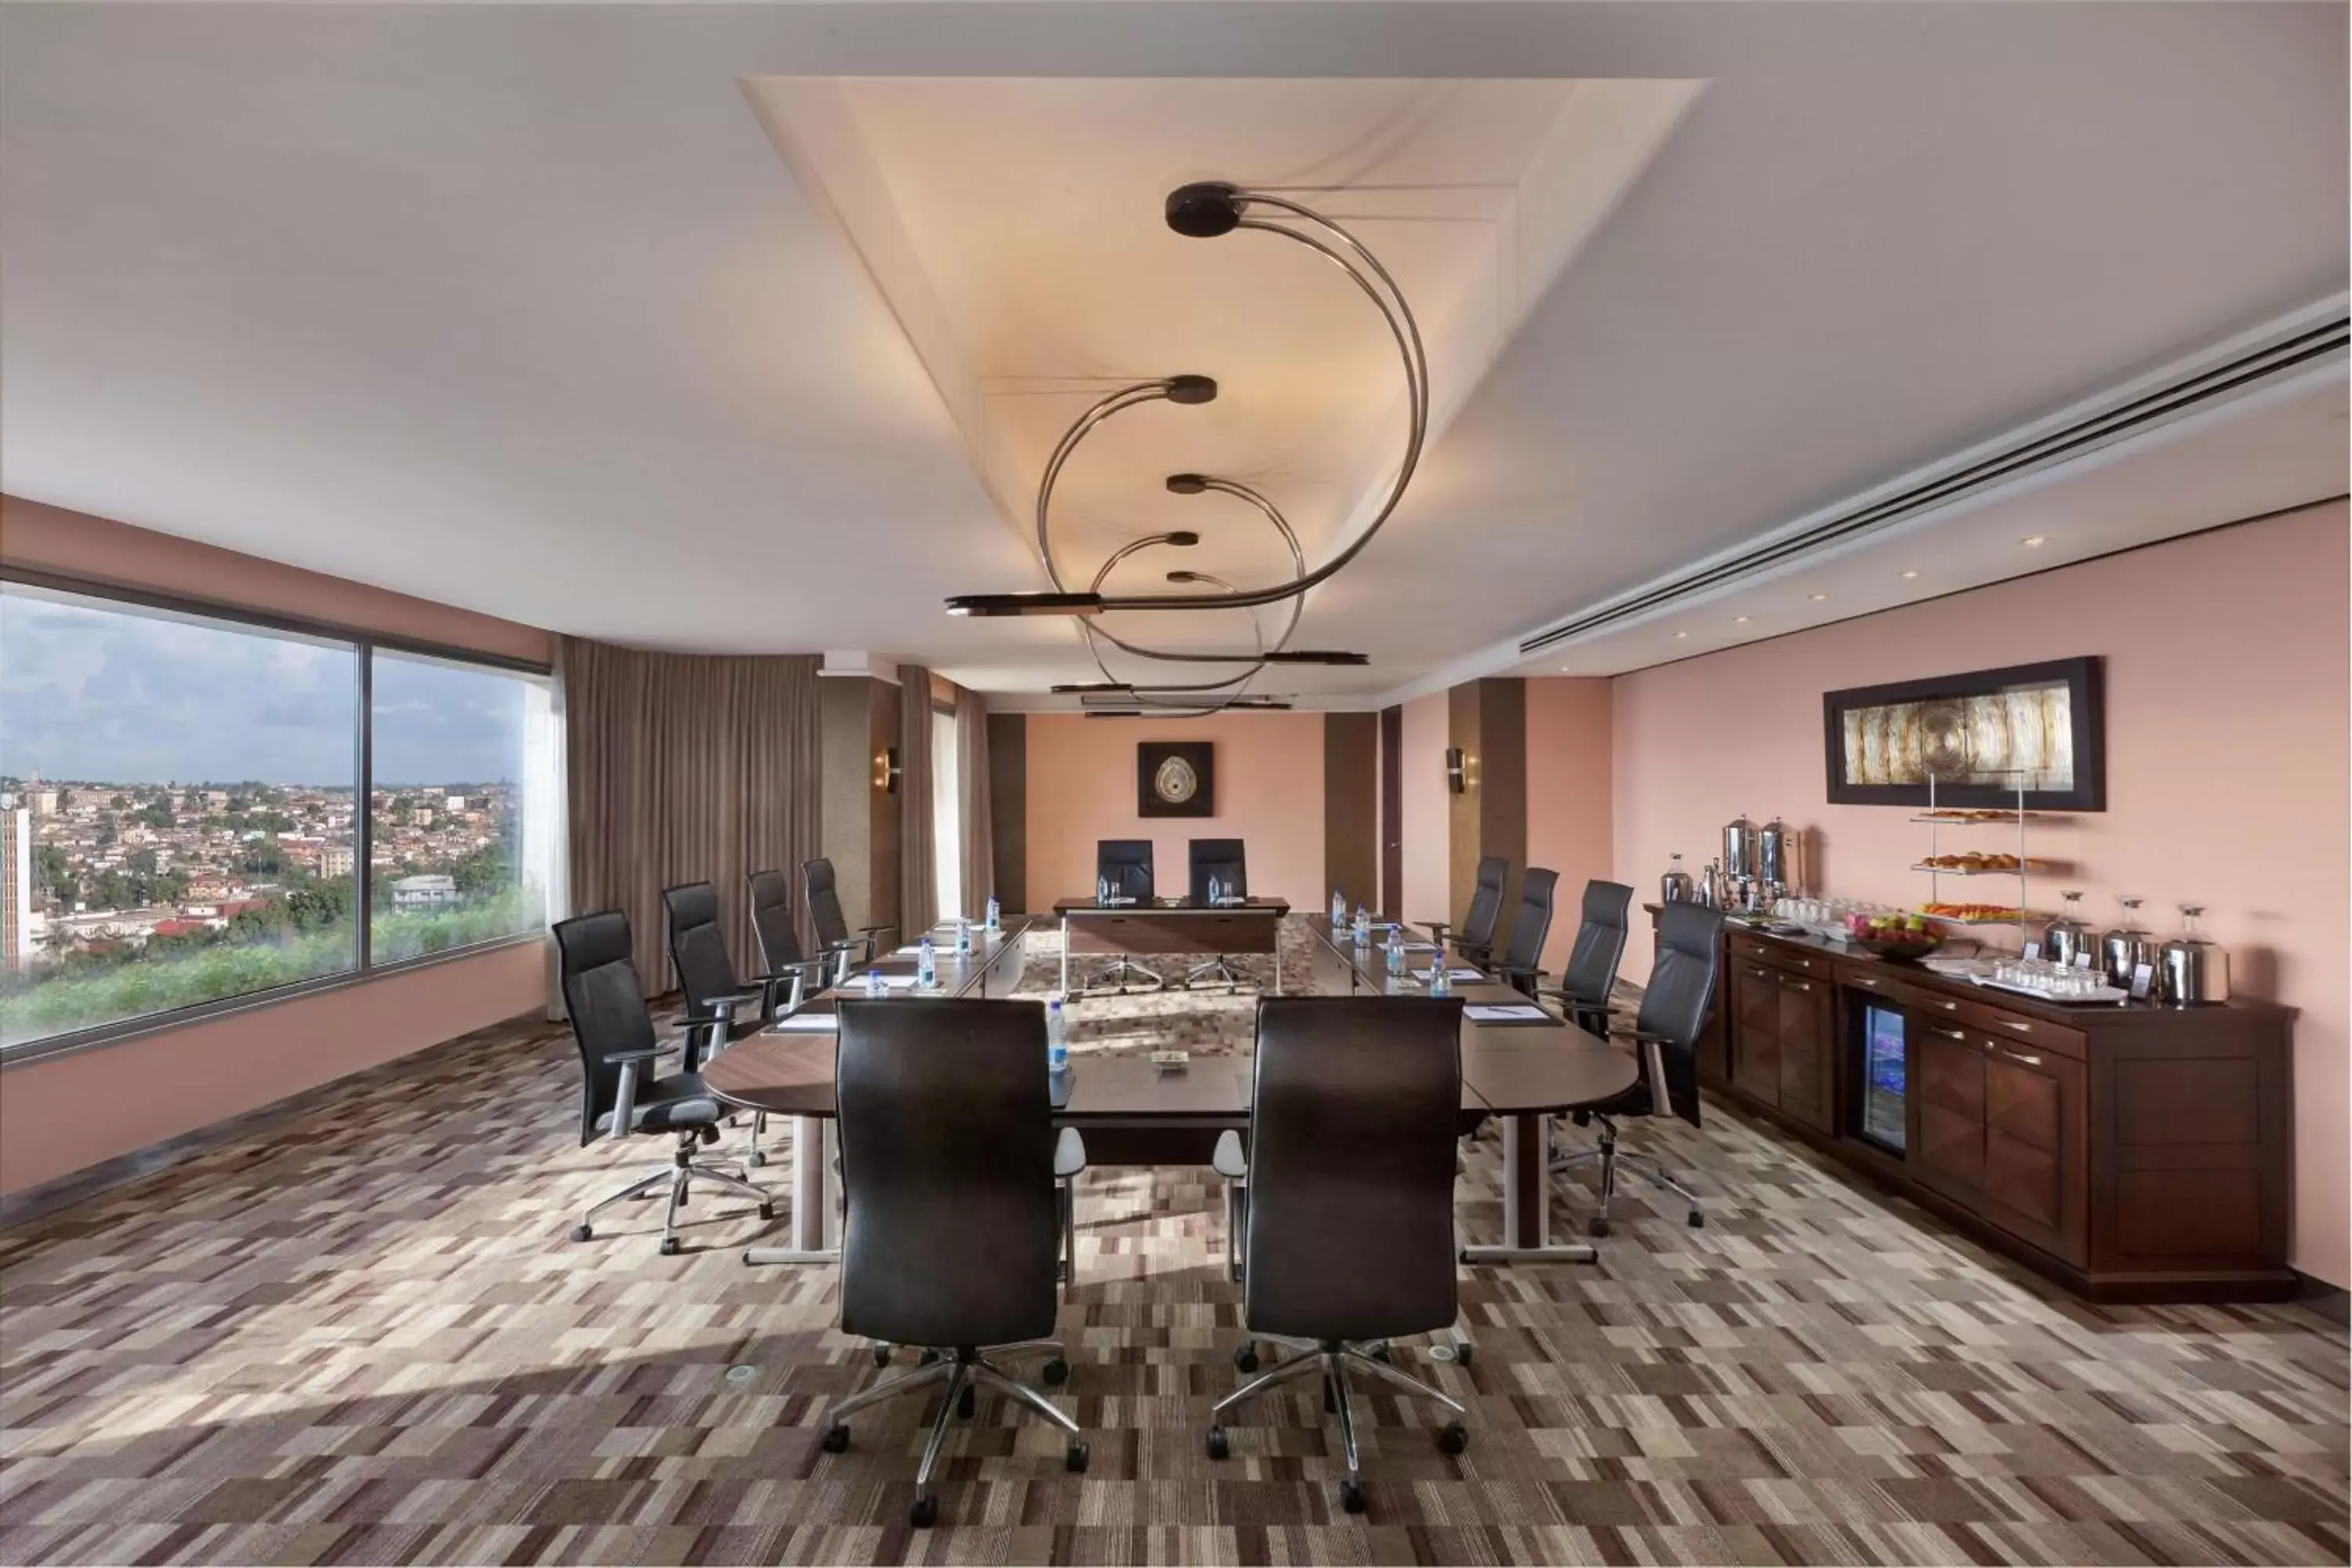 Meeting/conference room in Hilton Yaounde